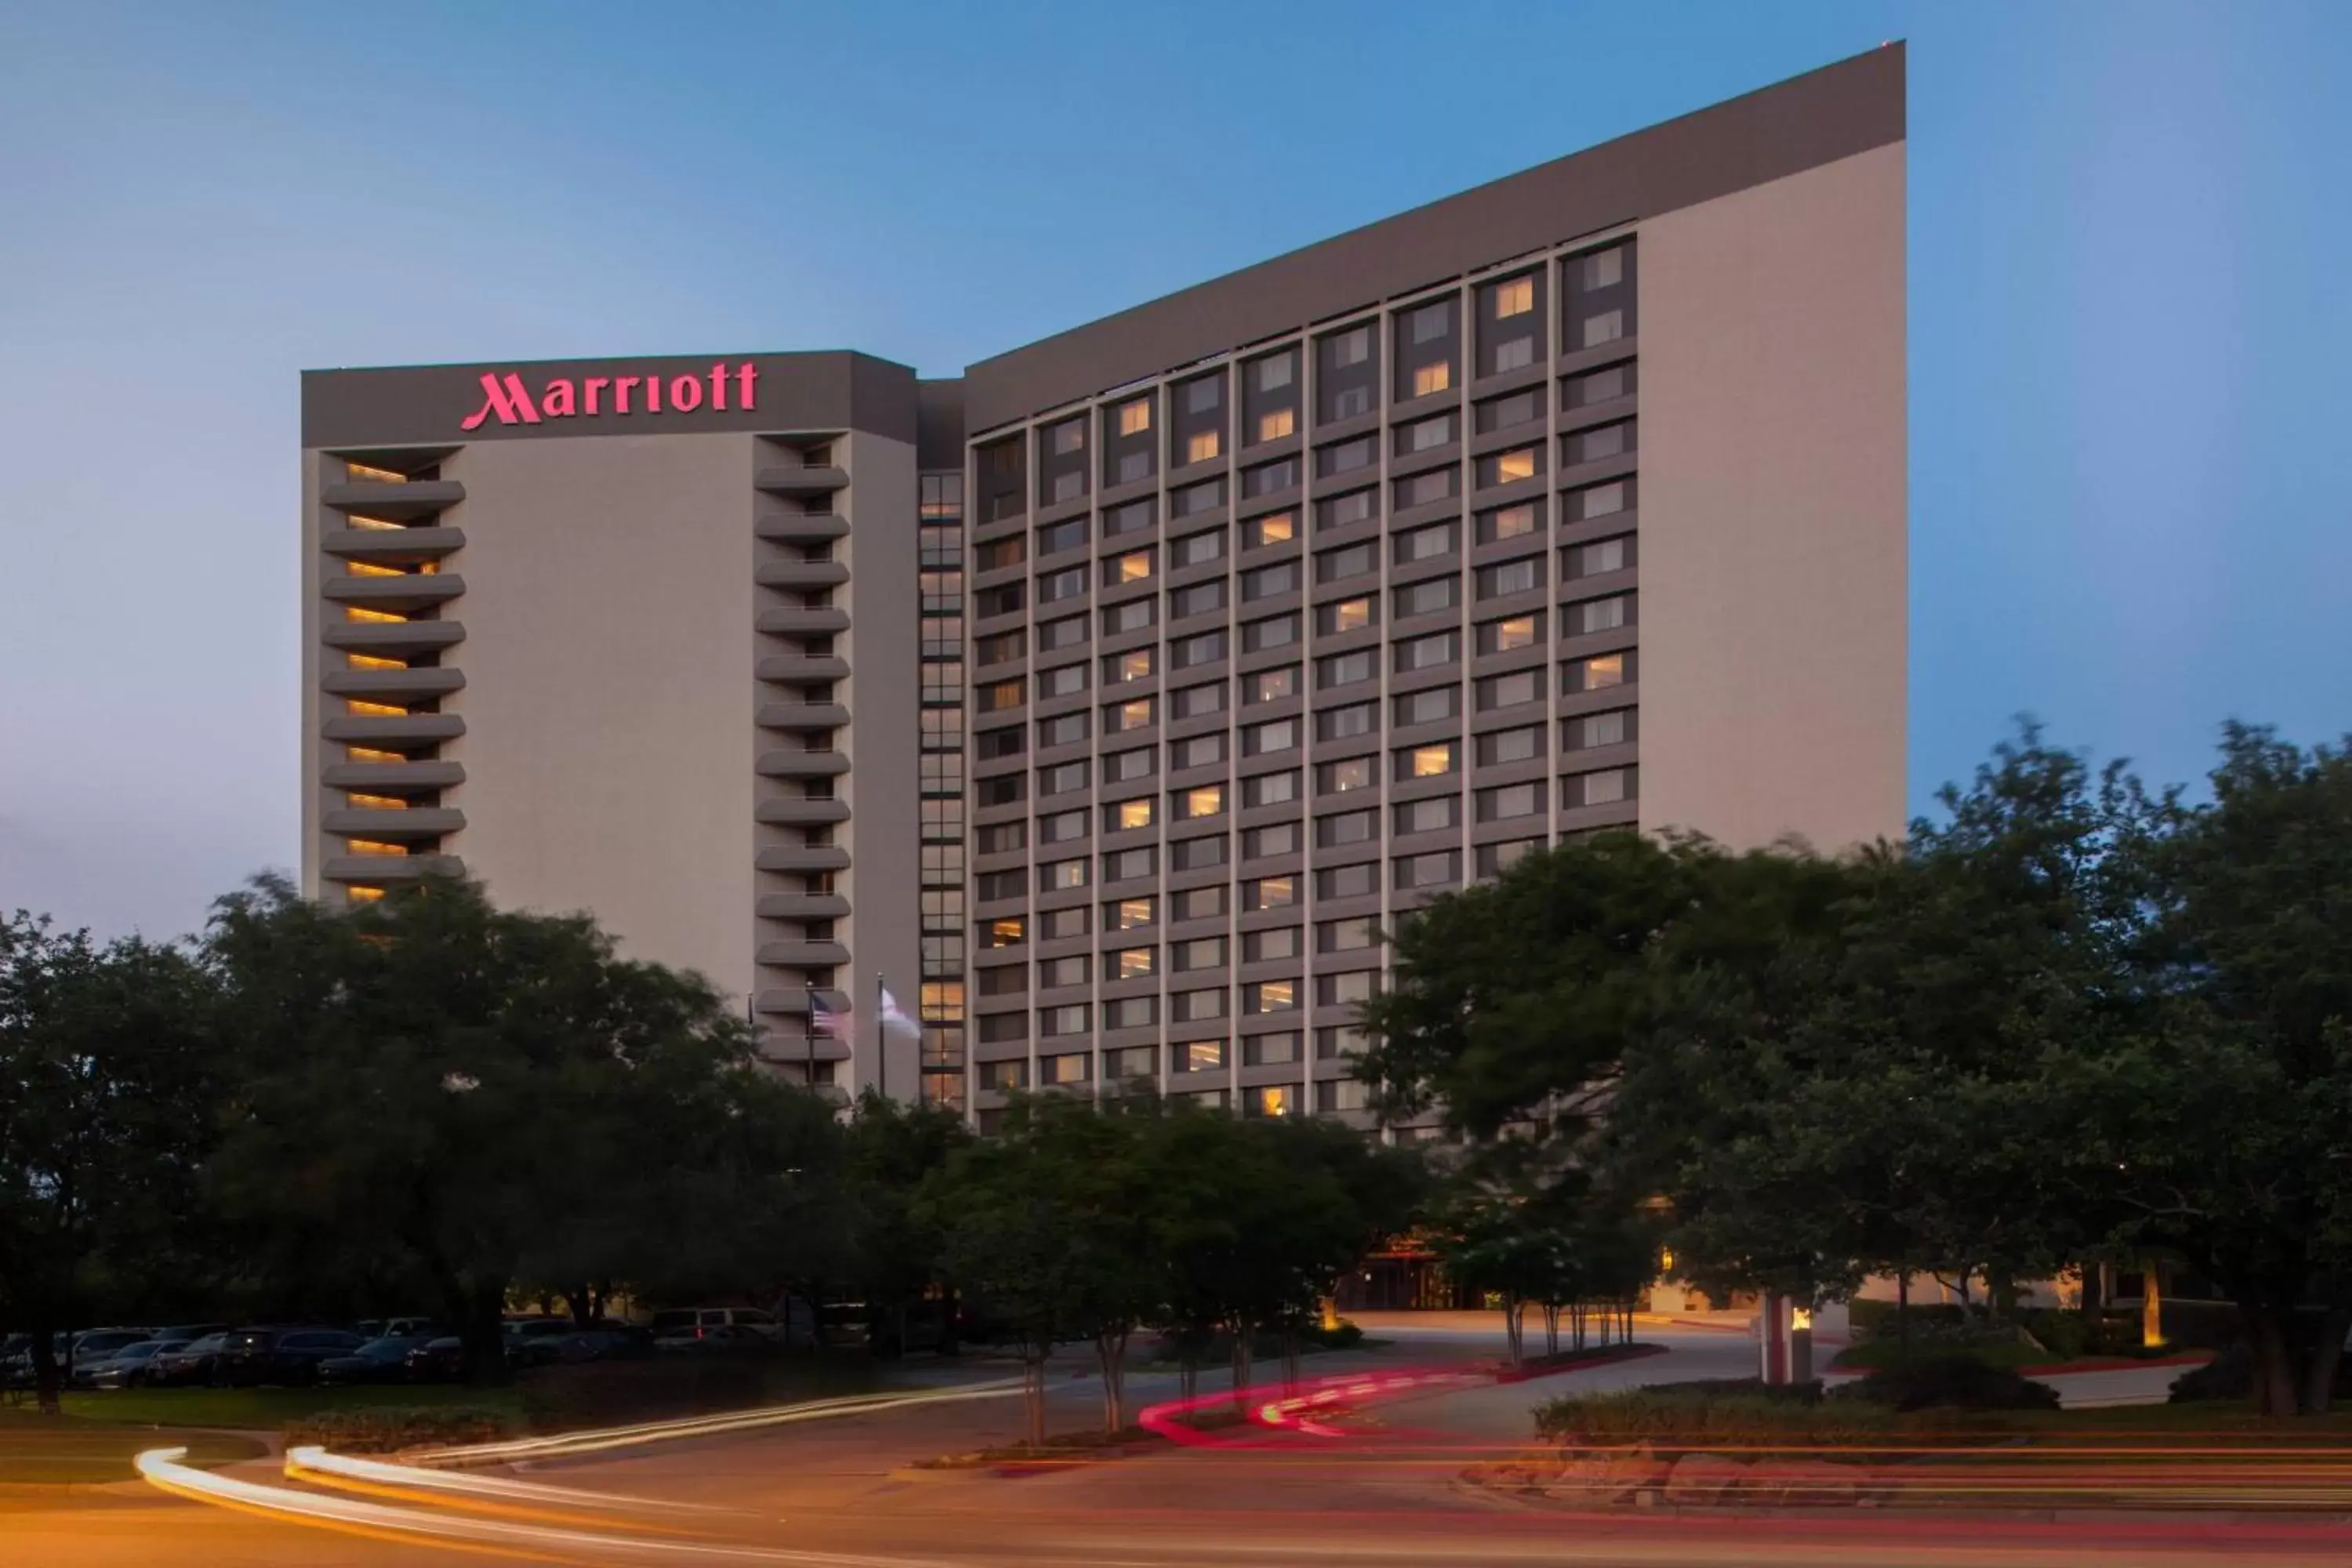 Property Building in Dallas/Fort Worth Airport Marriott